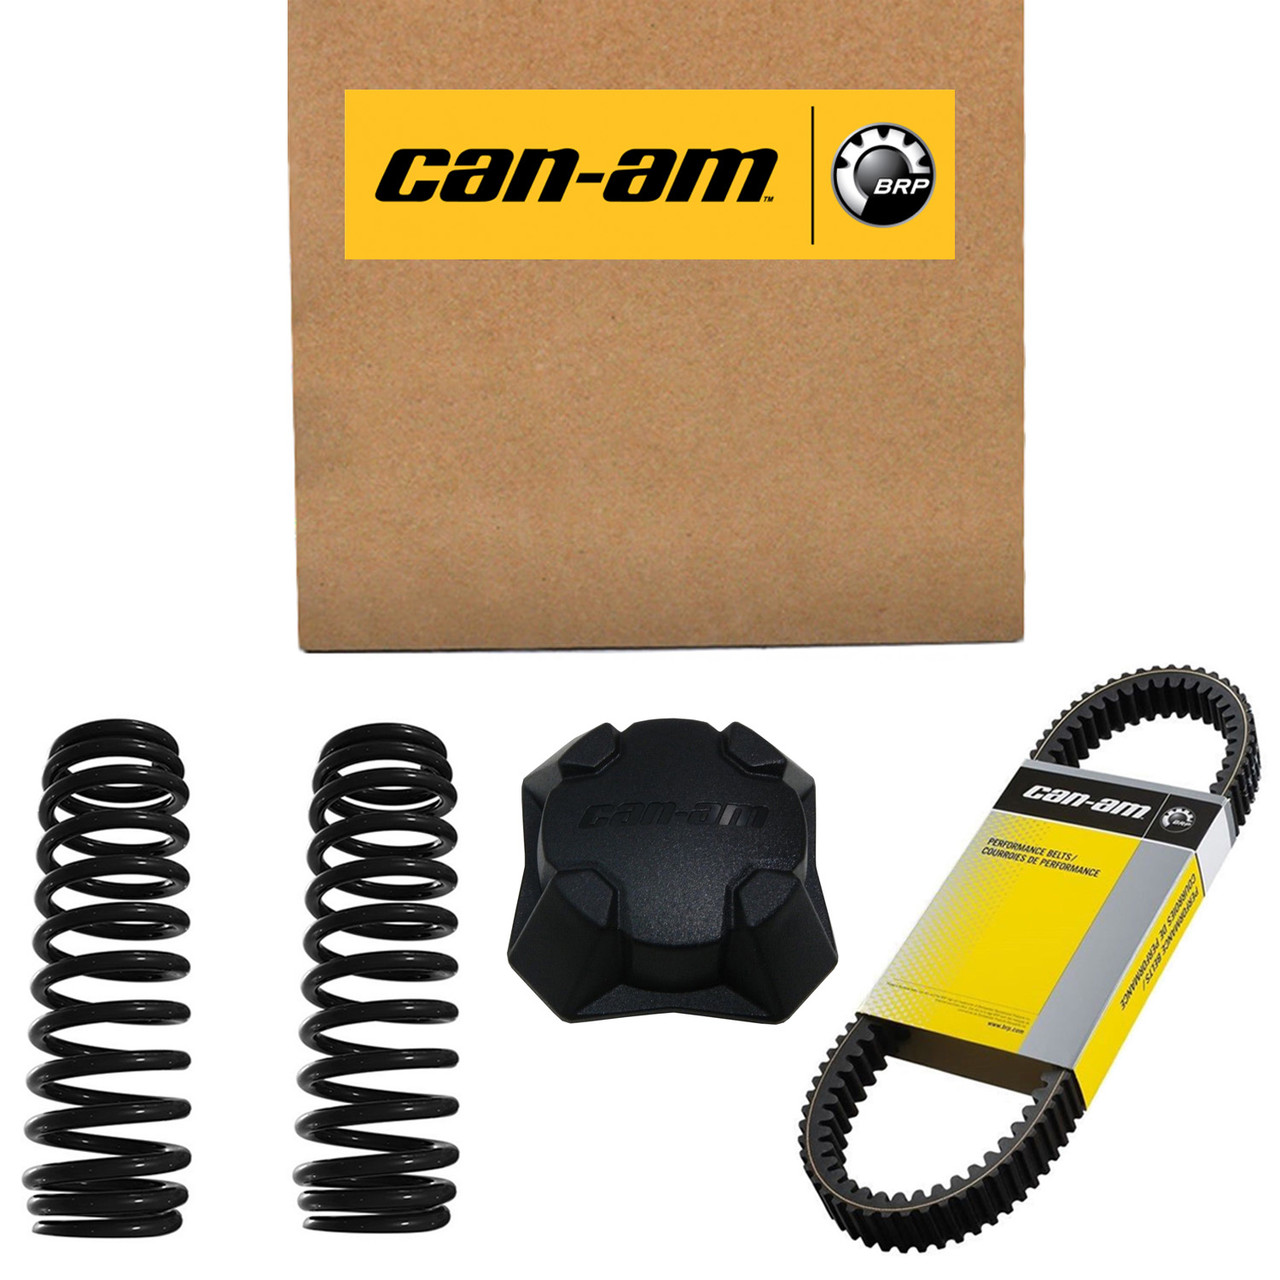 Can-Am New OEM Cargo Harness, 710006431